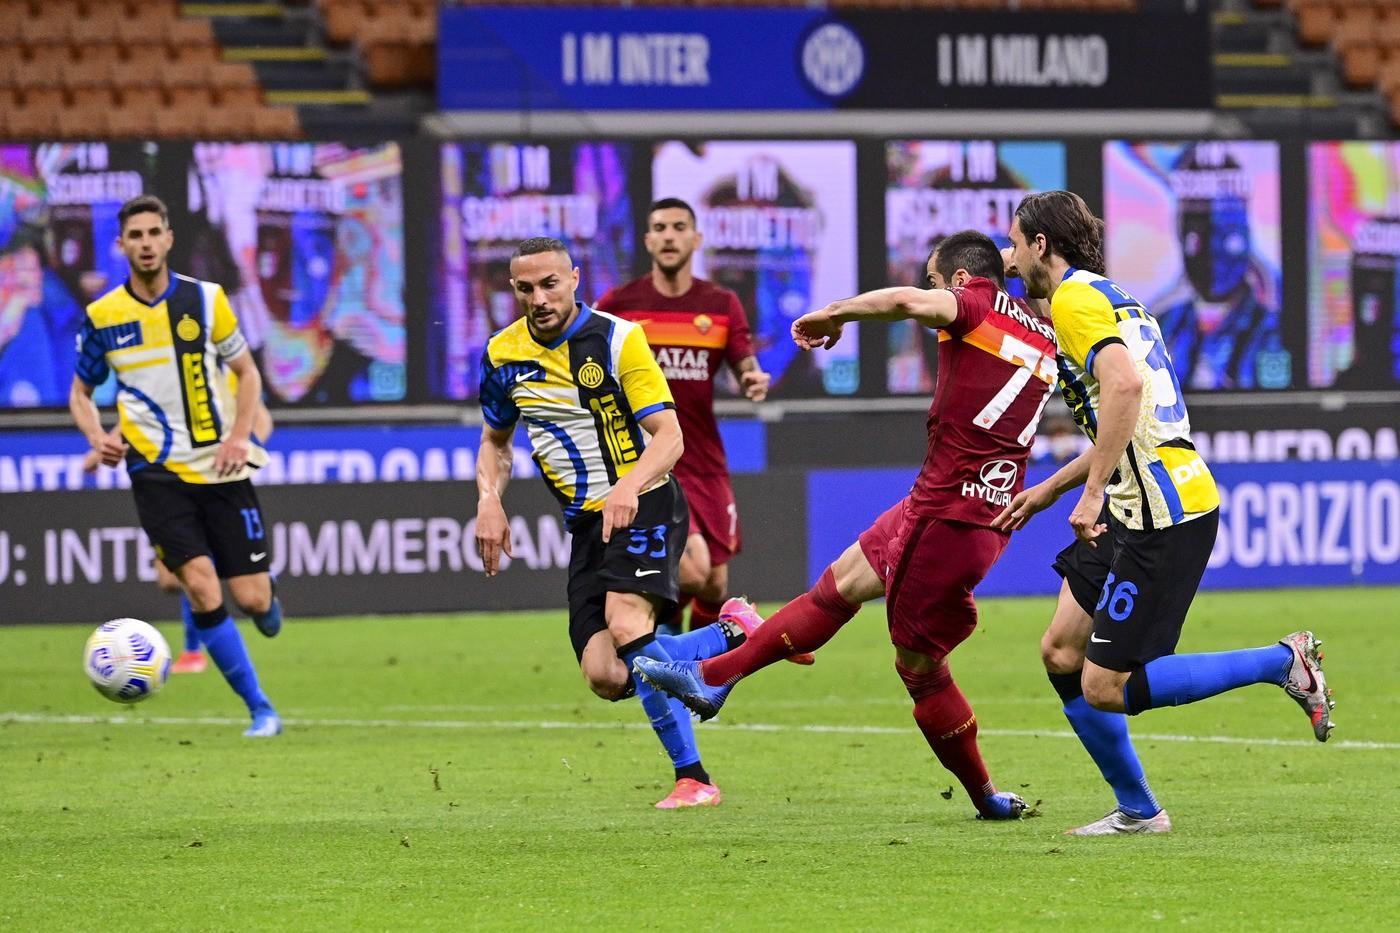 Inter stretched their unbeaten run to 20 matches in emphatic style as they crushed the struggling Roma side 3-1 in Serie A Round 36